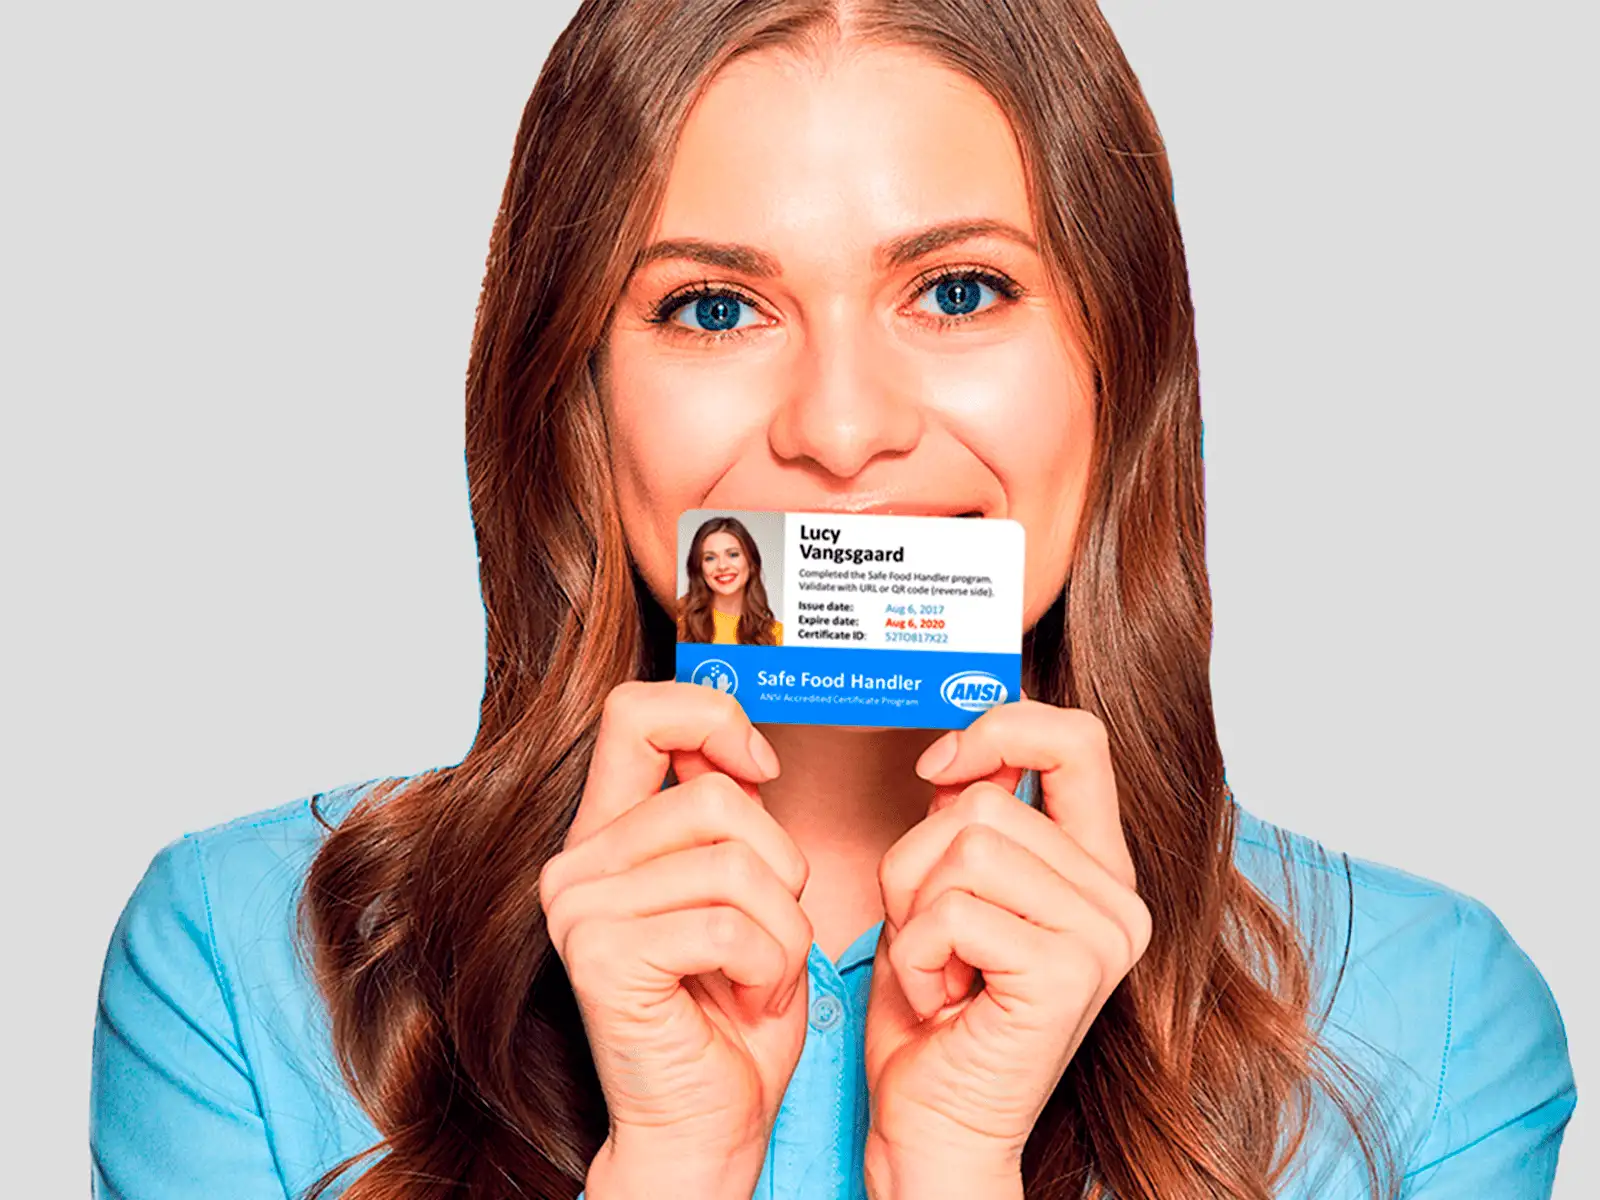 A woman smiling holding card